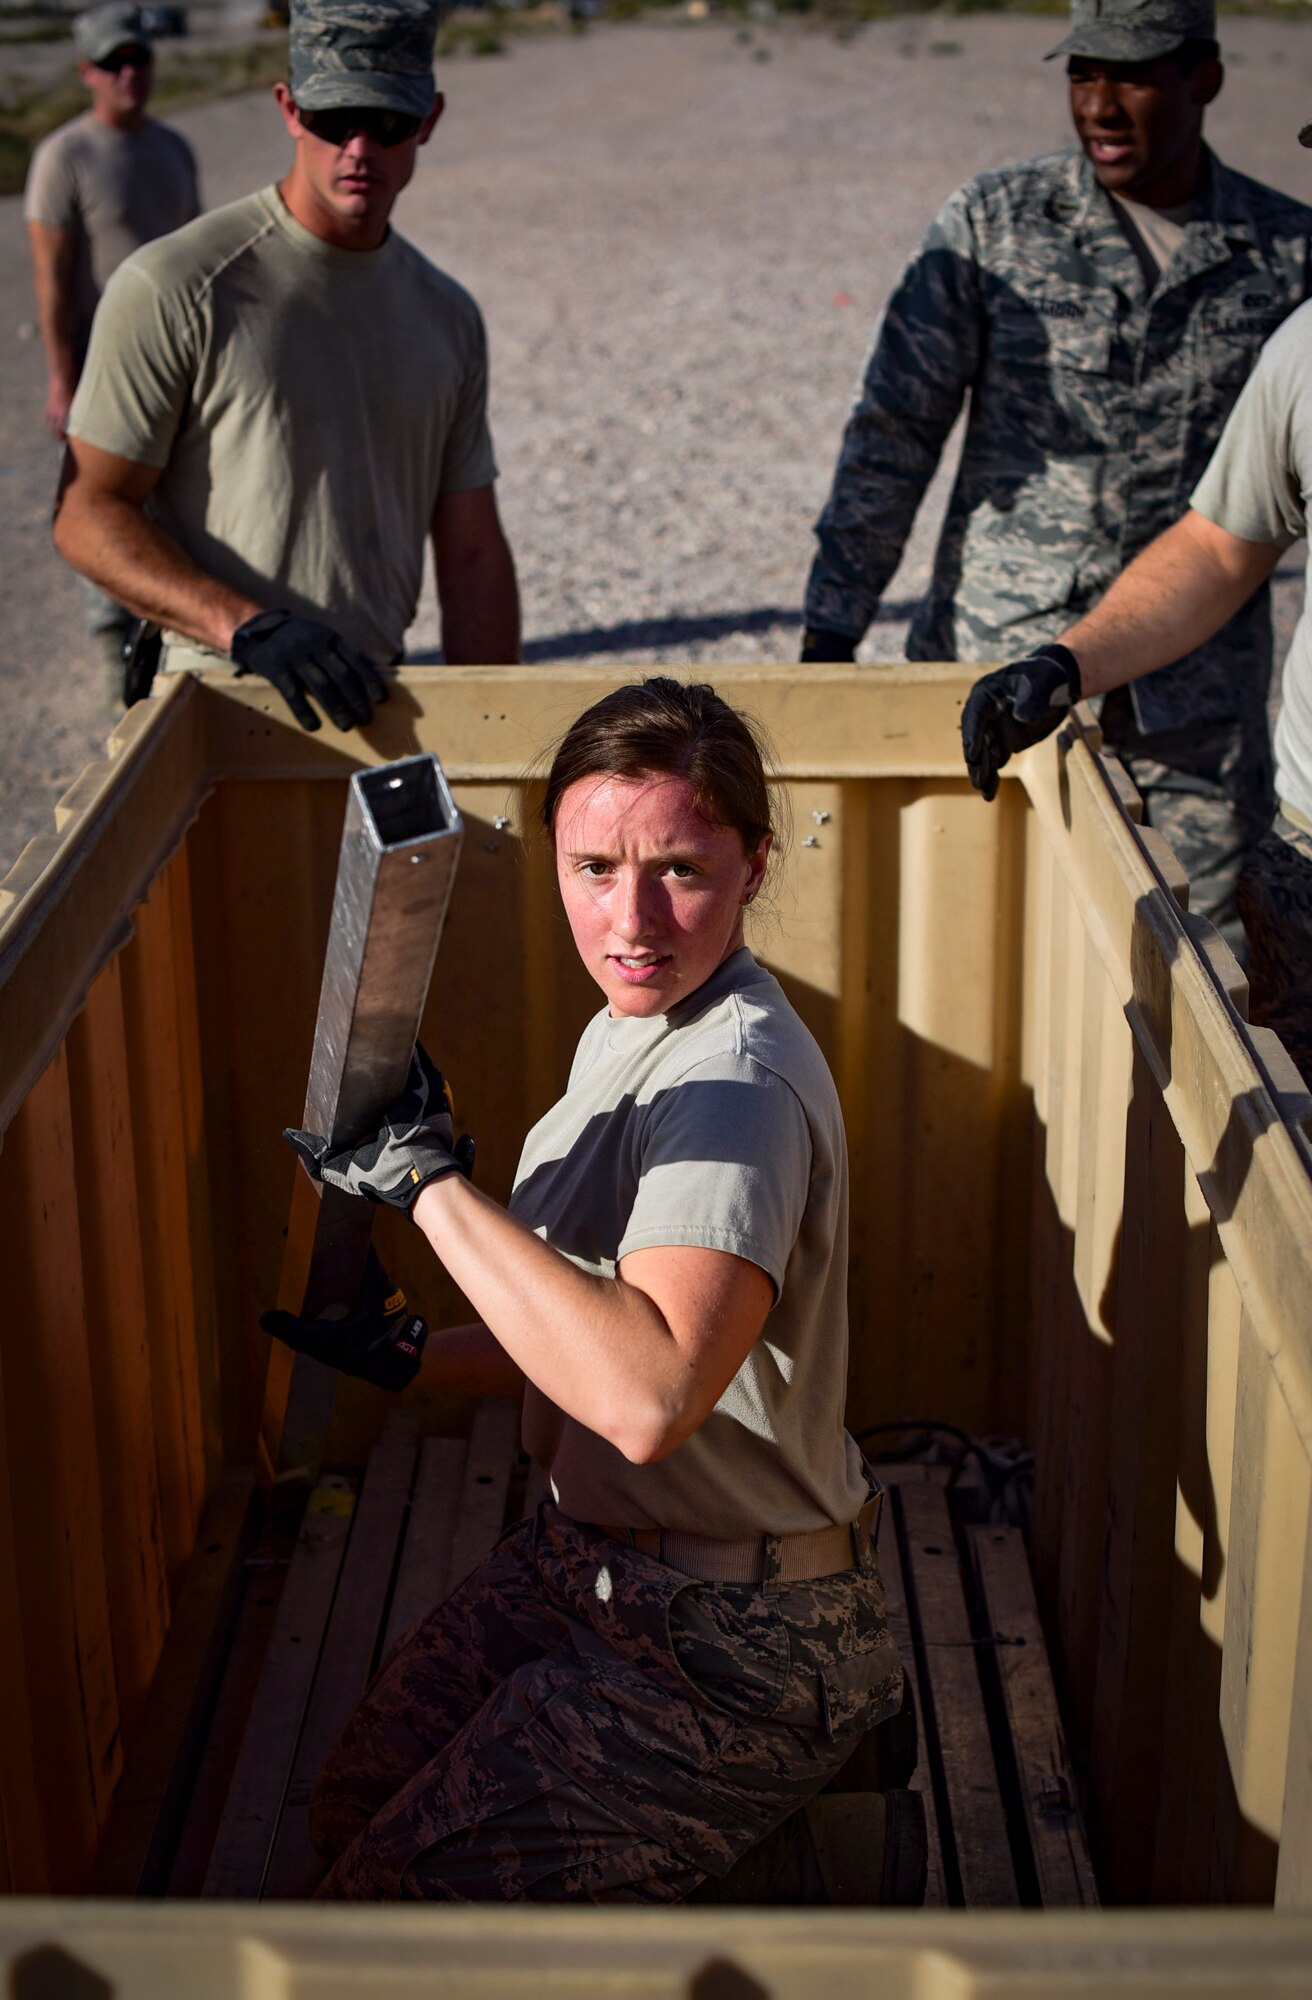 Senior Airman Kelly Martin, 99th Civil Engineer Squadron structural engineer, hands out parts of a field tent during a base emergency engineer force training exercise at Nellis Air Force Base, Nevada, Oct. 19, 2017. 99th CES structural engineers teamed up to build an Alaskan Small Shelter System. The system is commonly used throughout deployed locations. (U.S. Air Force photo by Airman 1st Class Andrew D. Sarver/Released)